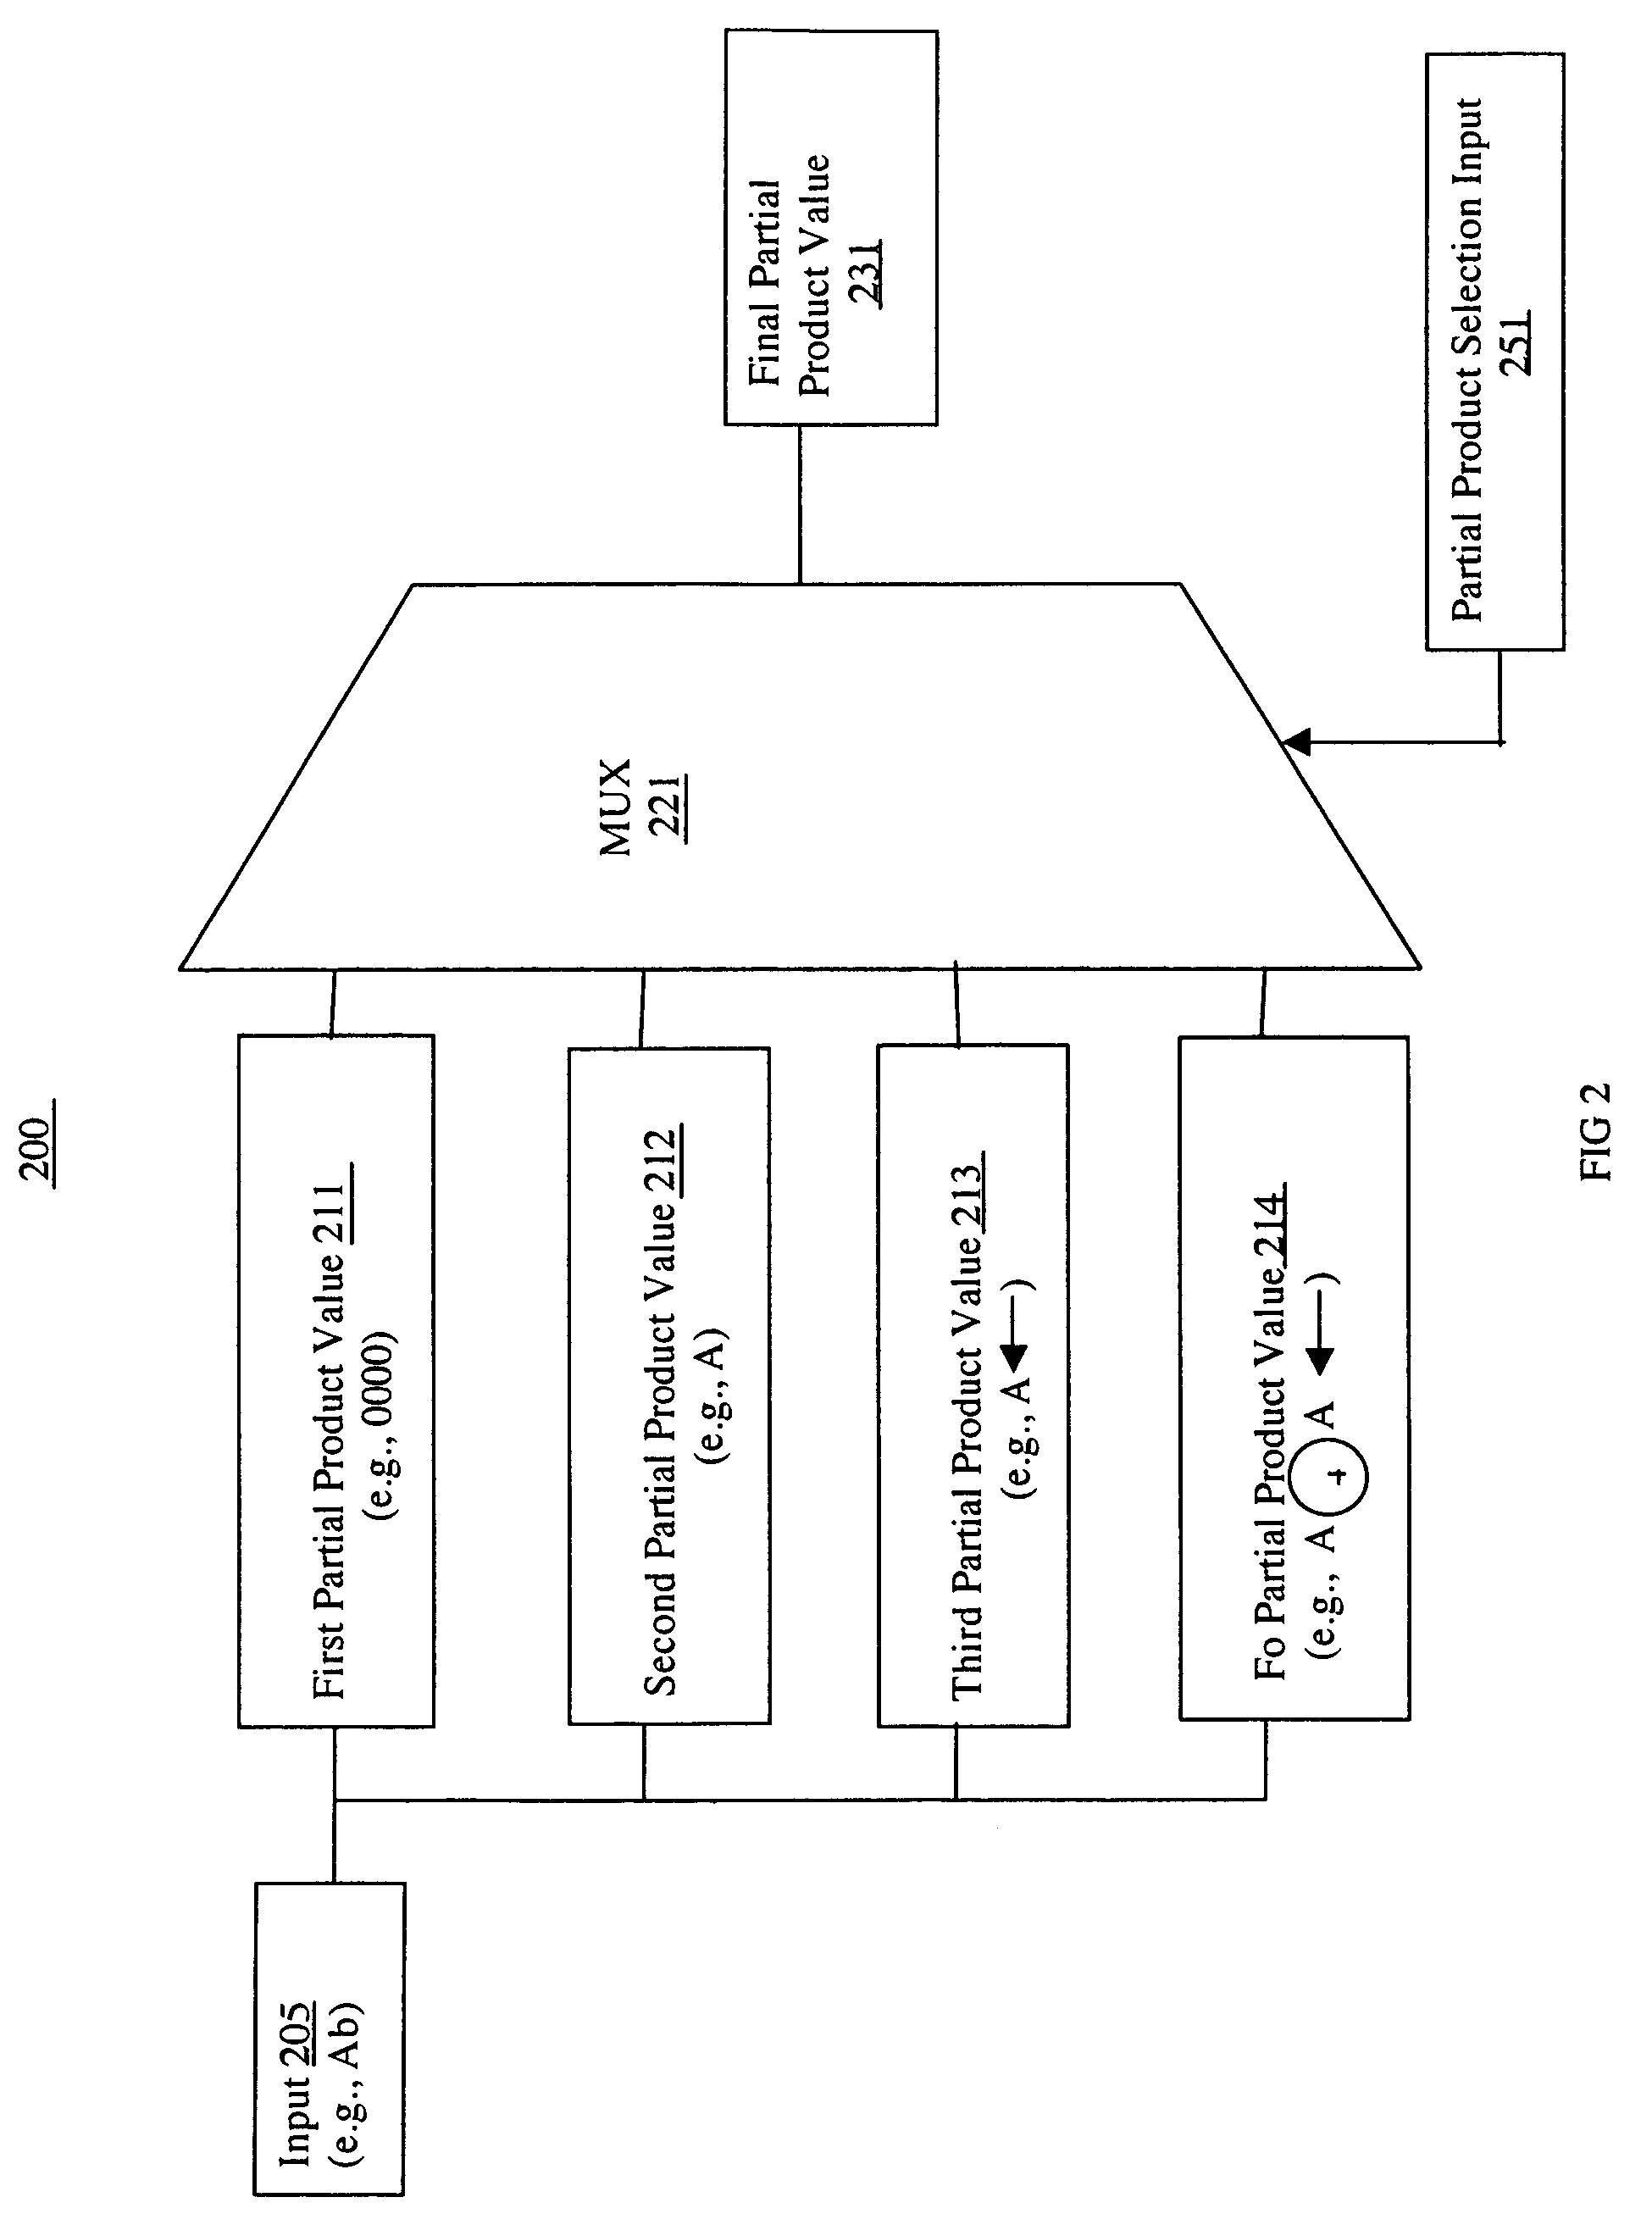 Galois field multiplication system and method